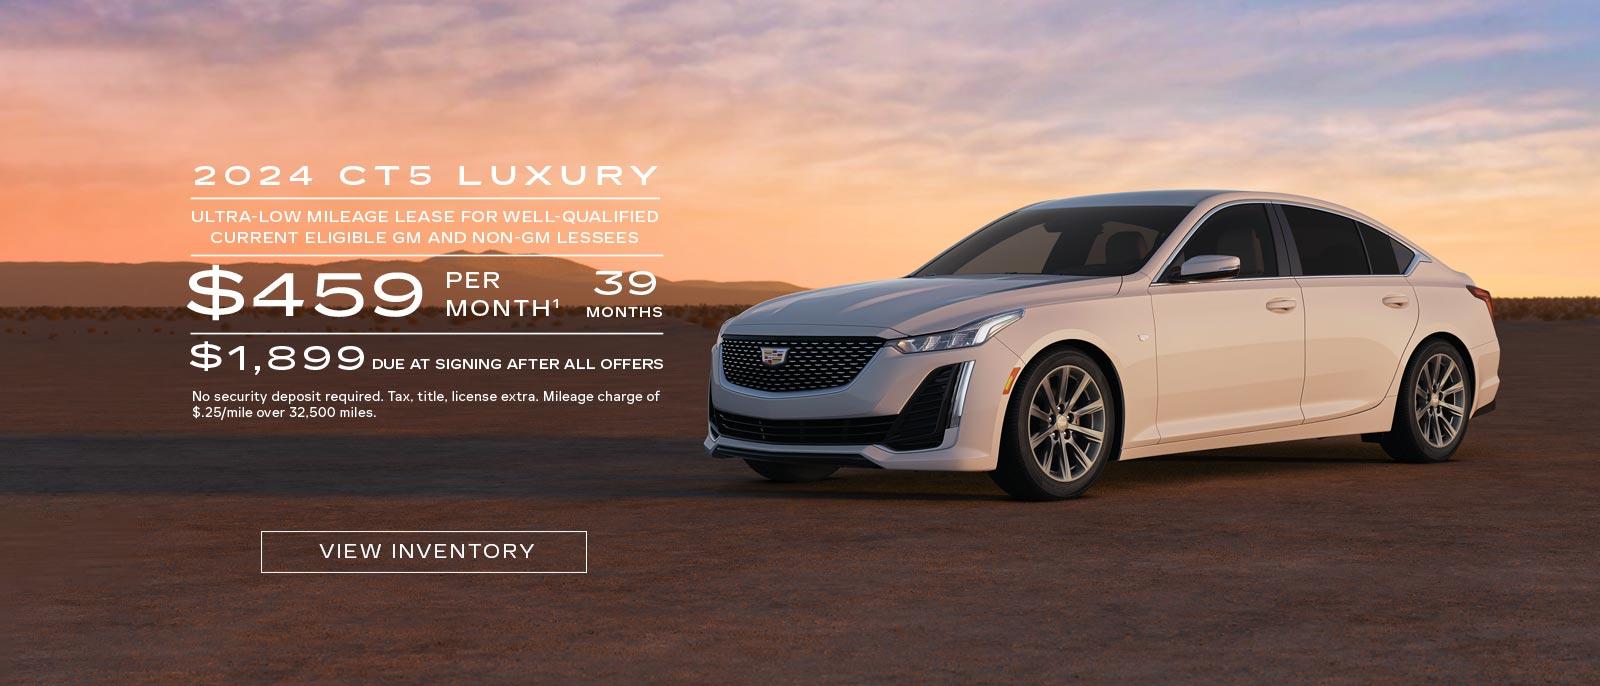 2024 CT5 Luxury. Ultra-low mileage lease for well-qualified current eligible GM and Non-GM Lessees. $459 per month. 39 months. $1,899 due at signing after all offers.